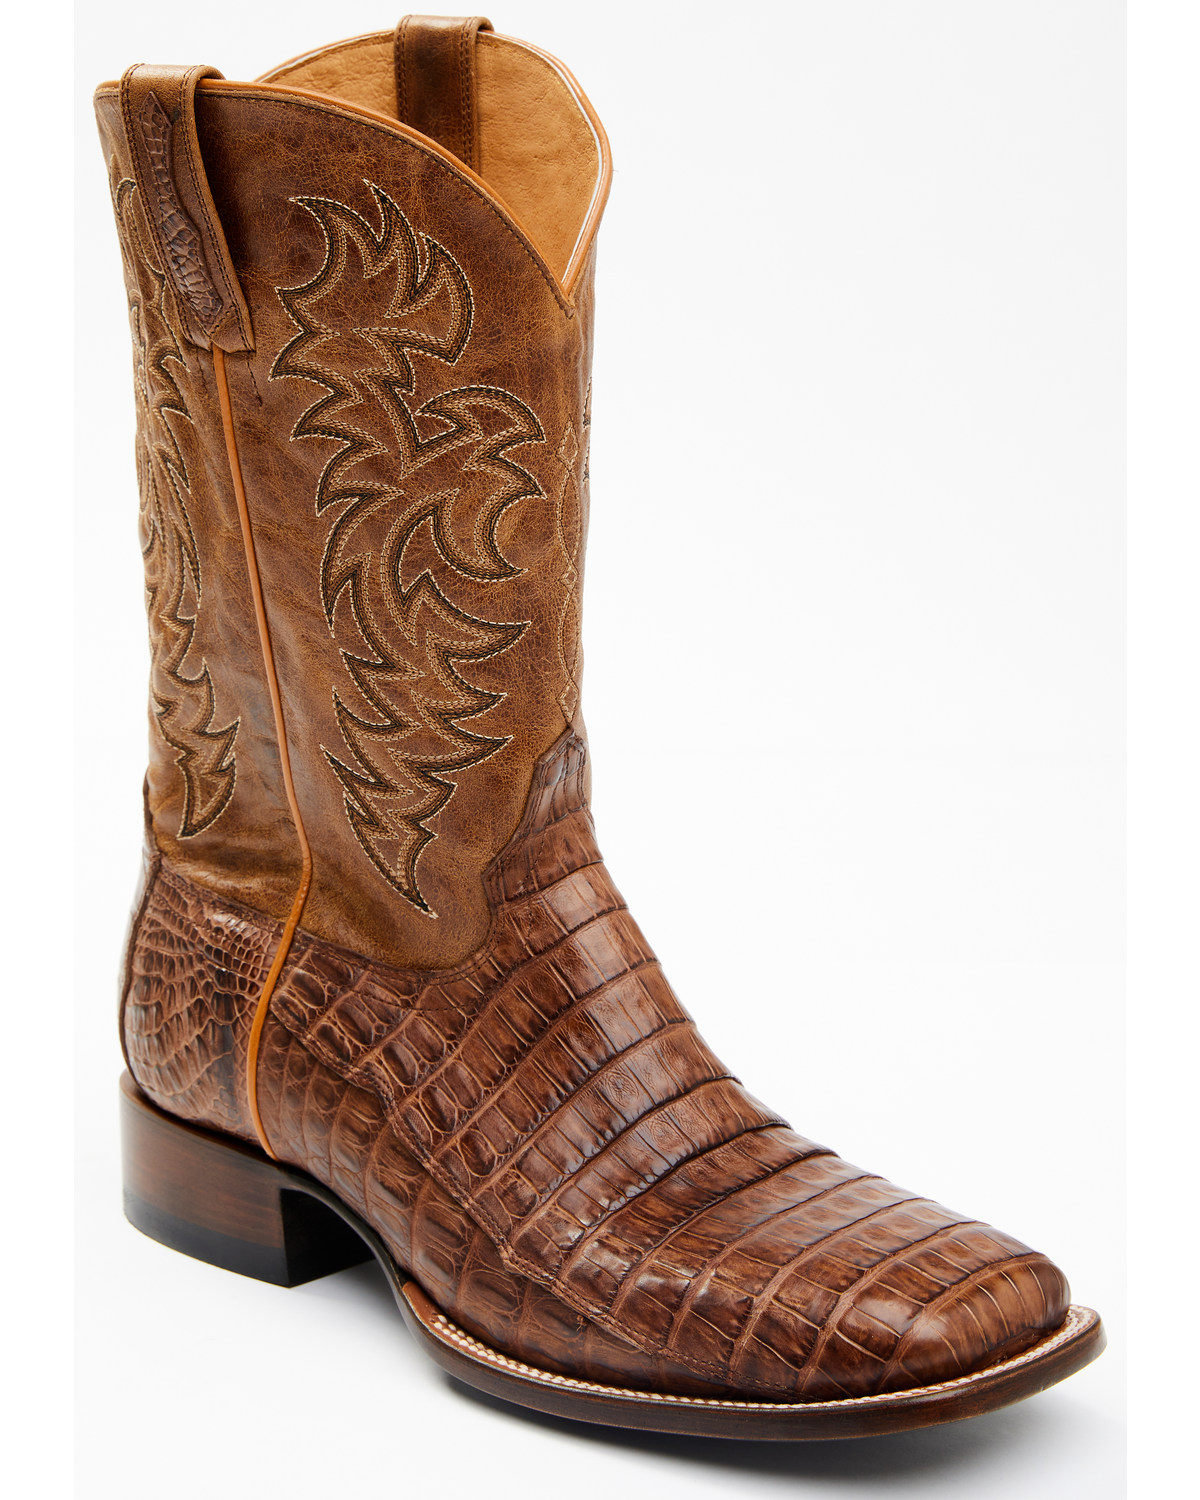 Cody James Men's Nuez Exotic Caiman Skin Western Boots - Broad Square Toe